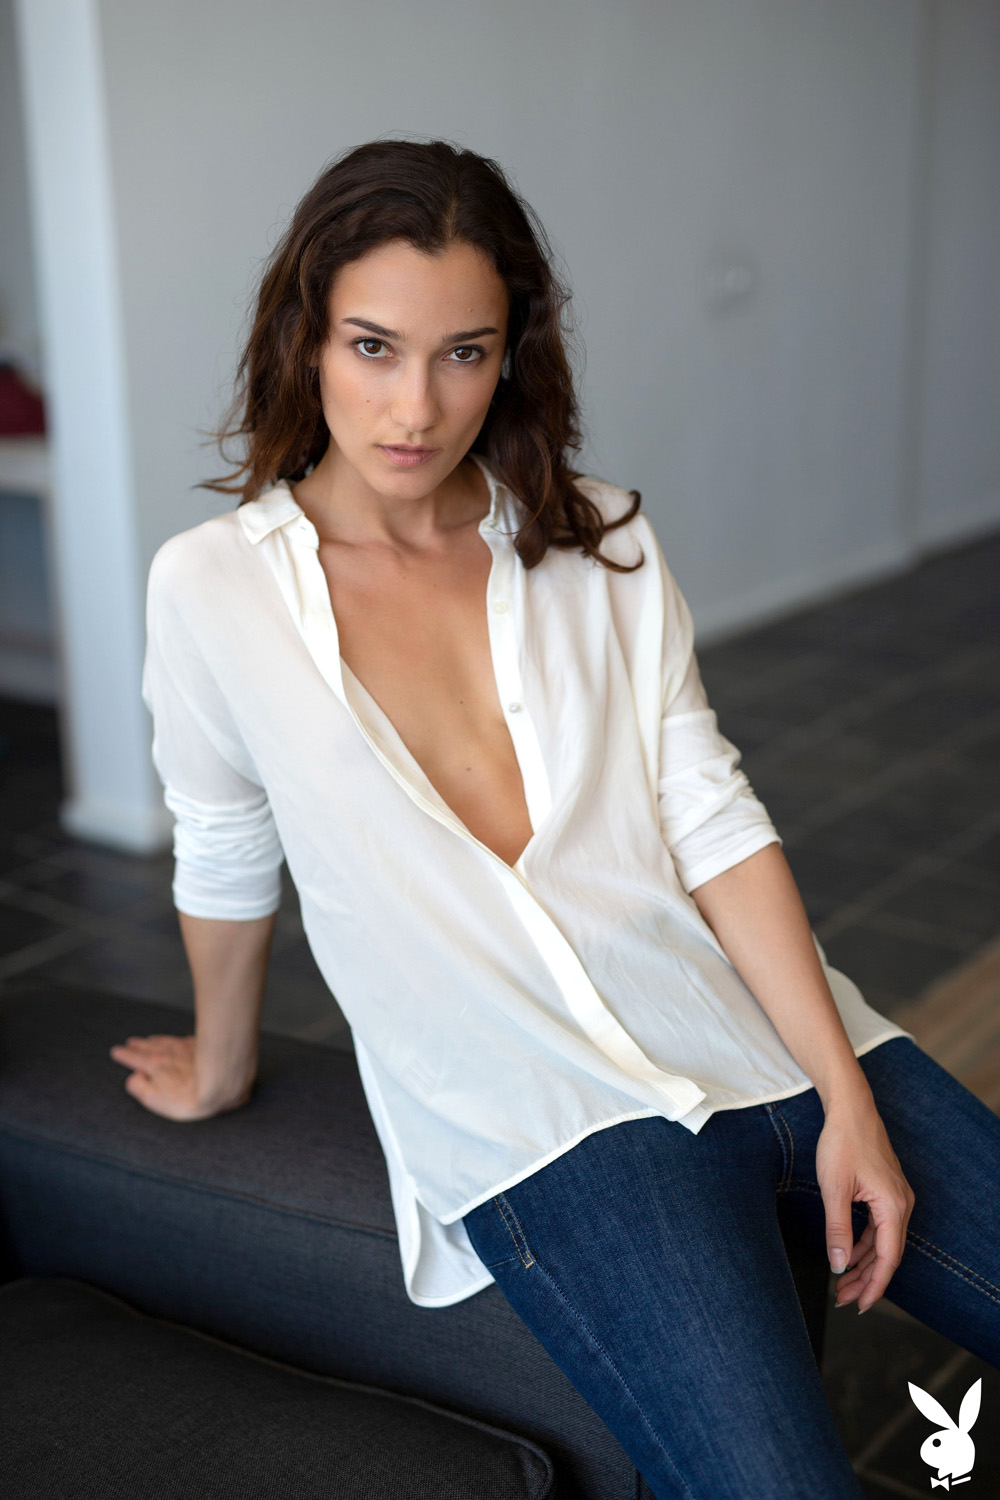 A Beauty Slipping Out Of Her Casual Jeans And White Blouse